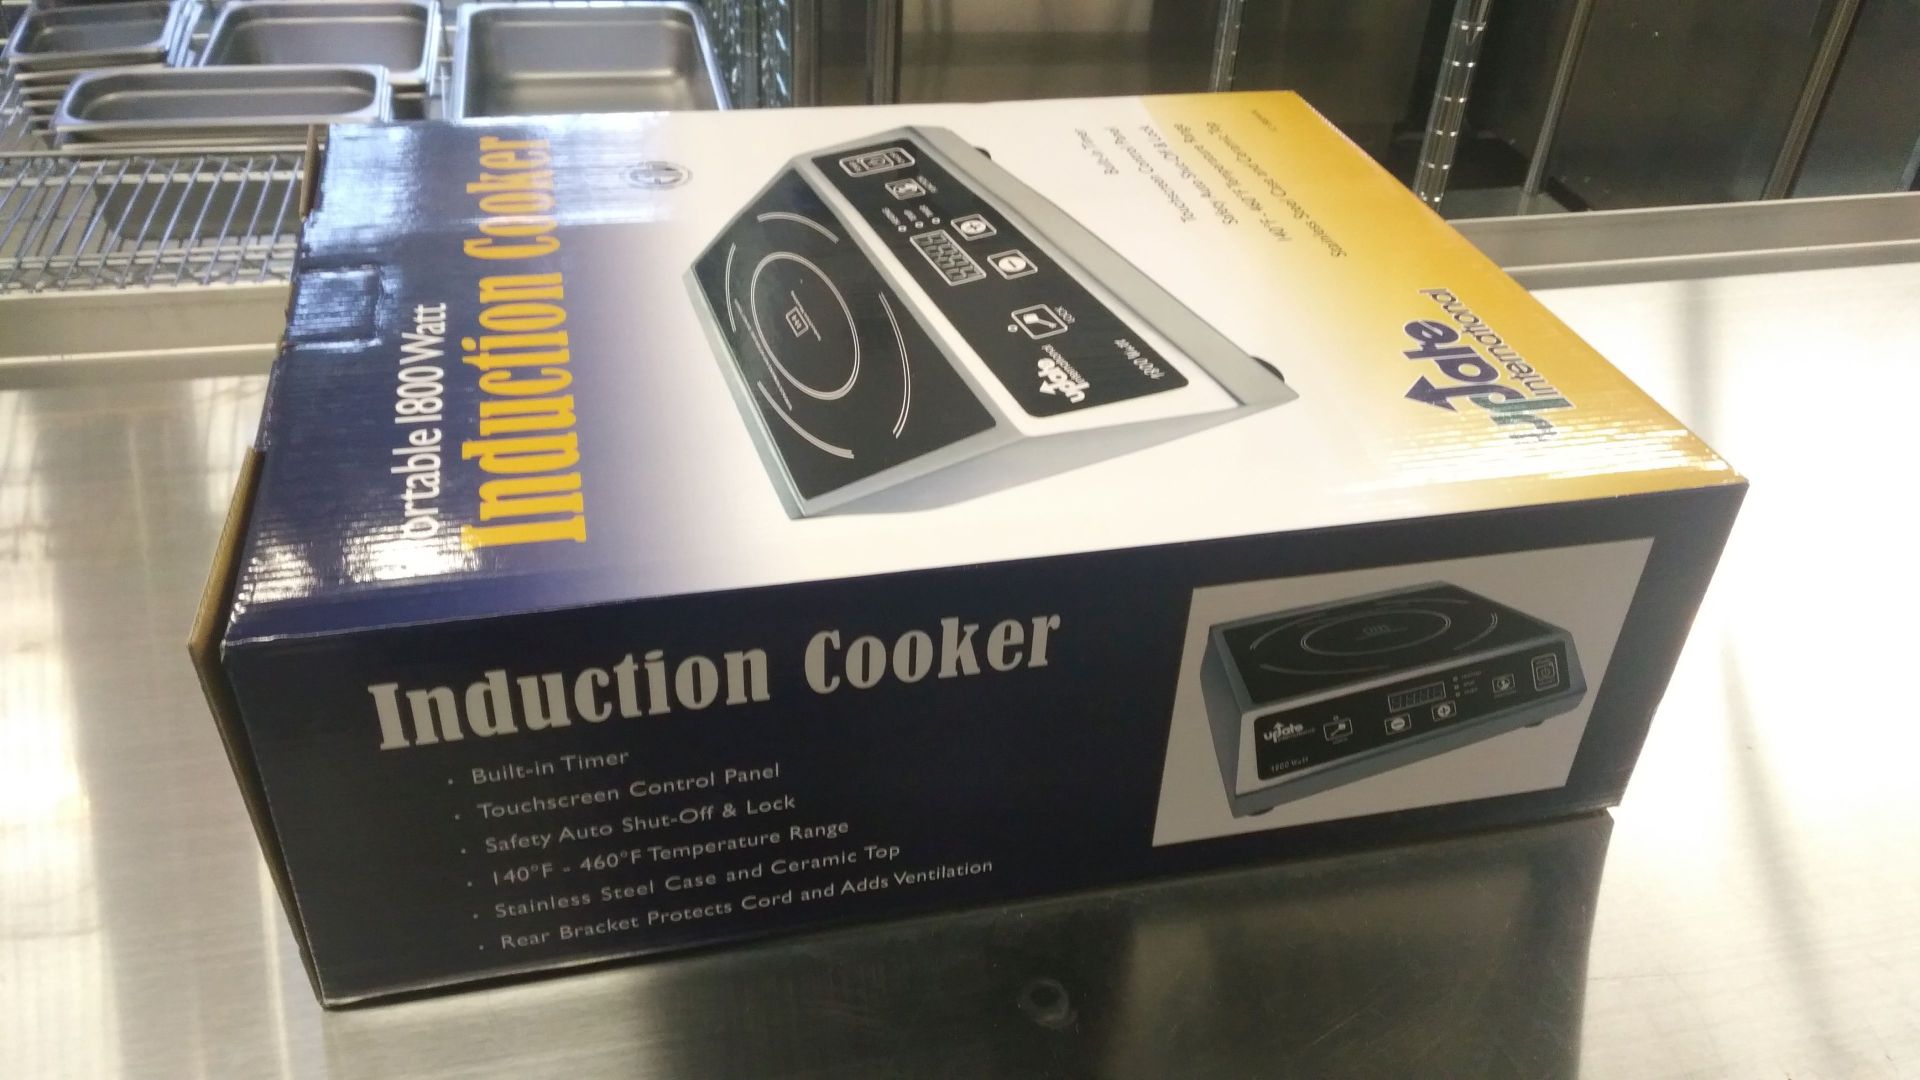 Update IC-1800WN Countertop Commercial Induction Cooktop - Image 6 of 7